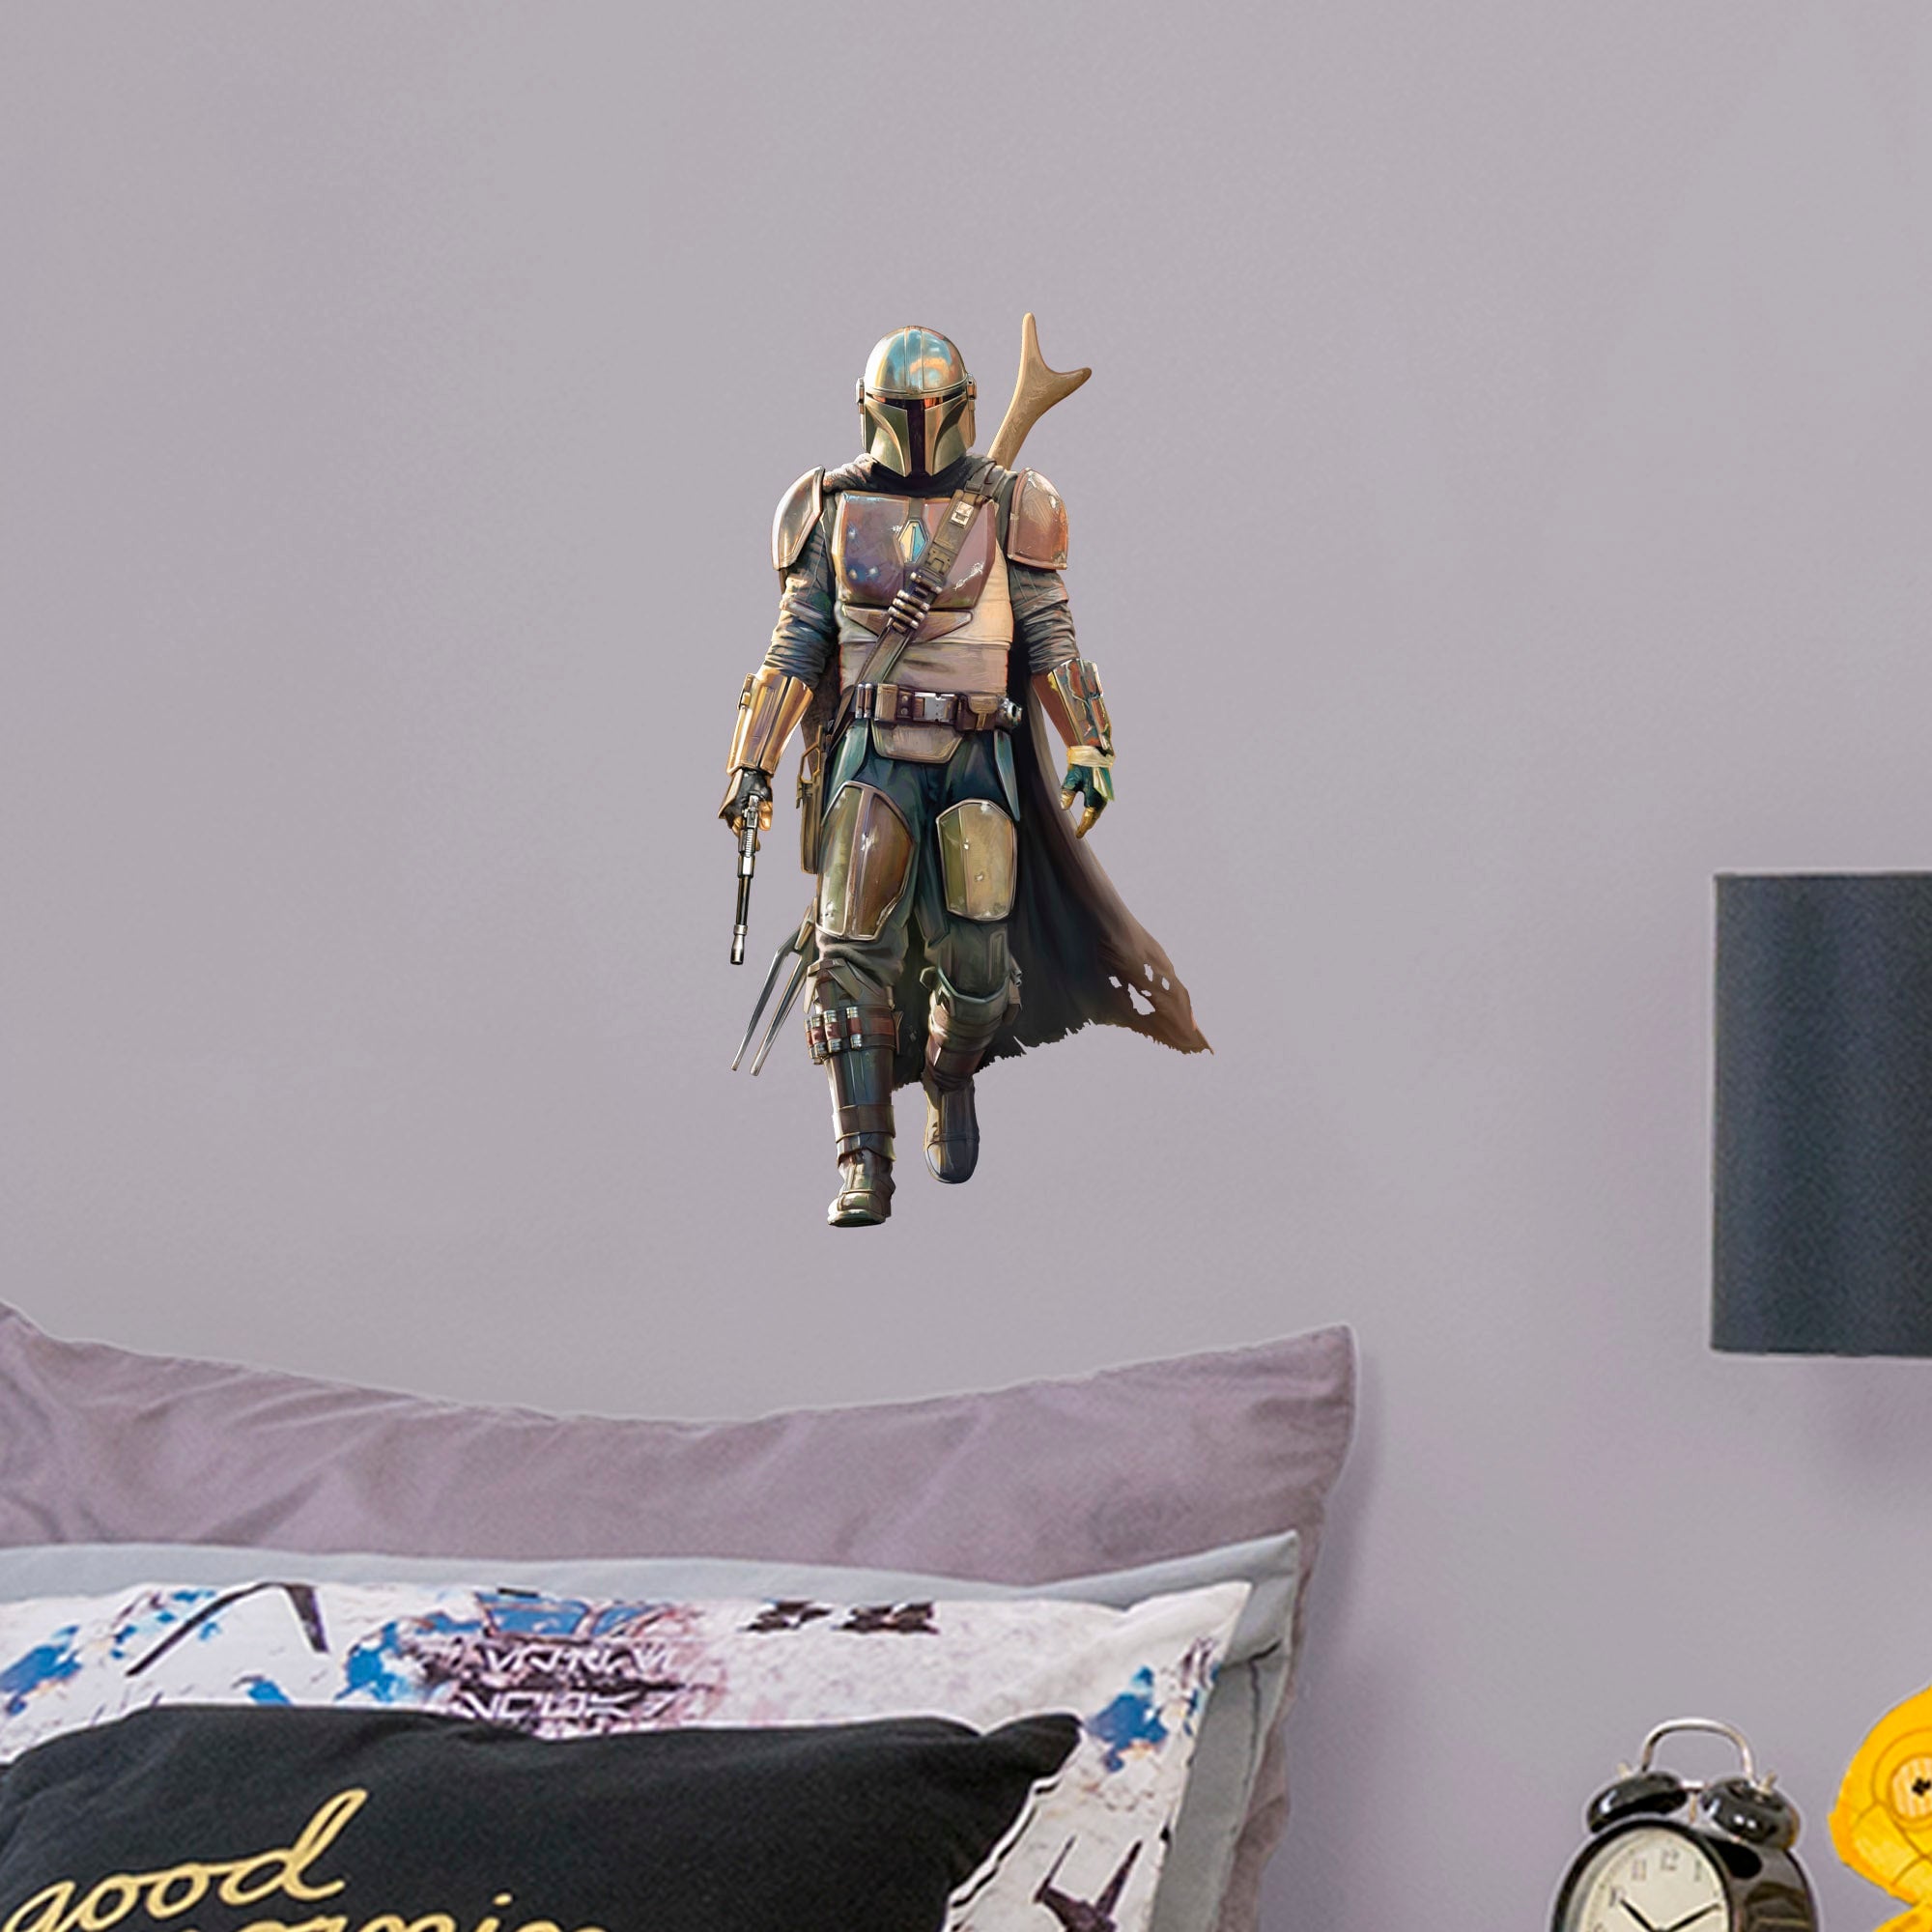 The Mandalorian - Star Wars: The Mandalorian - Officially Licensed Removable Wall Decal Large by Fathead | Vinyl